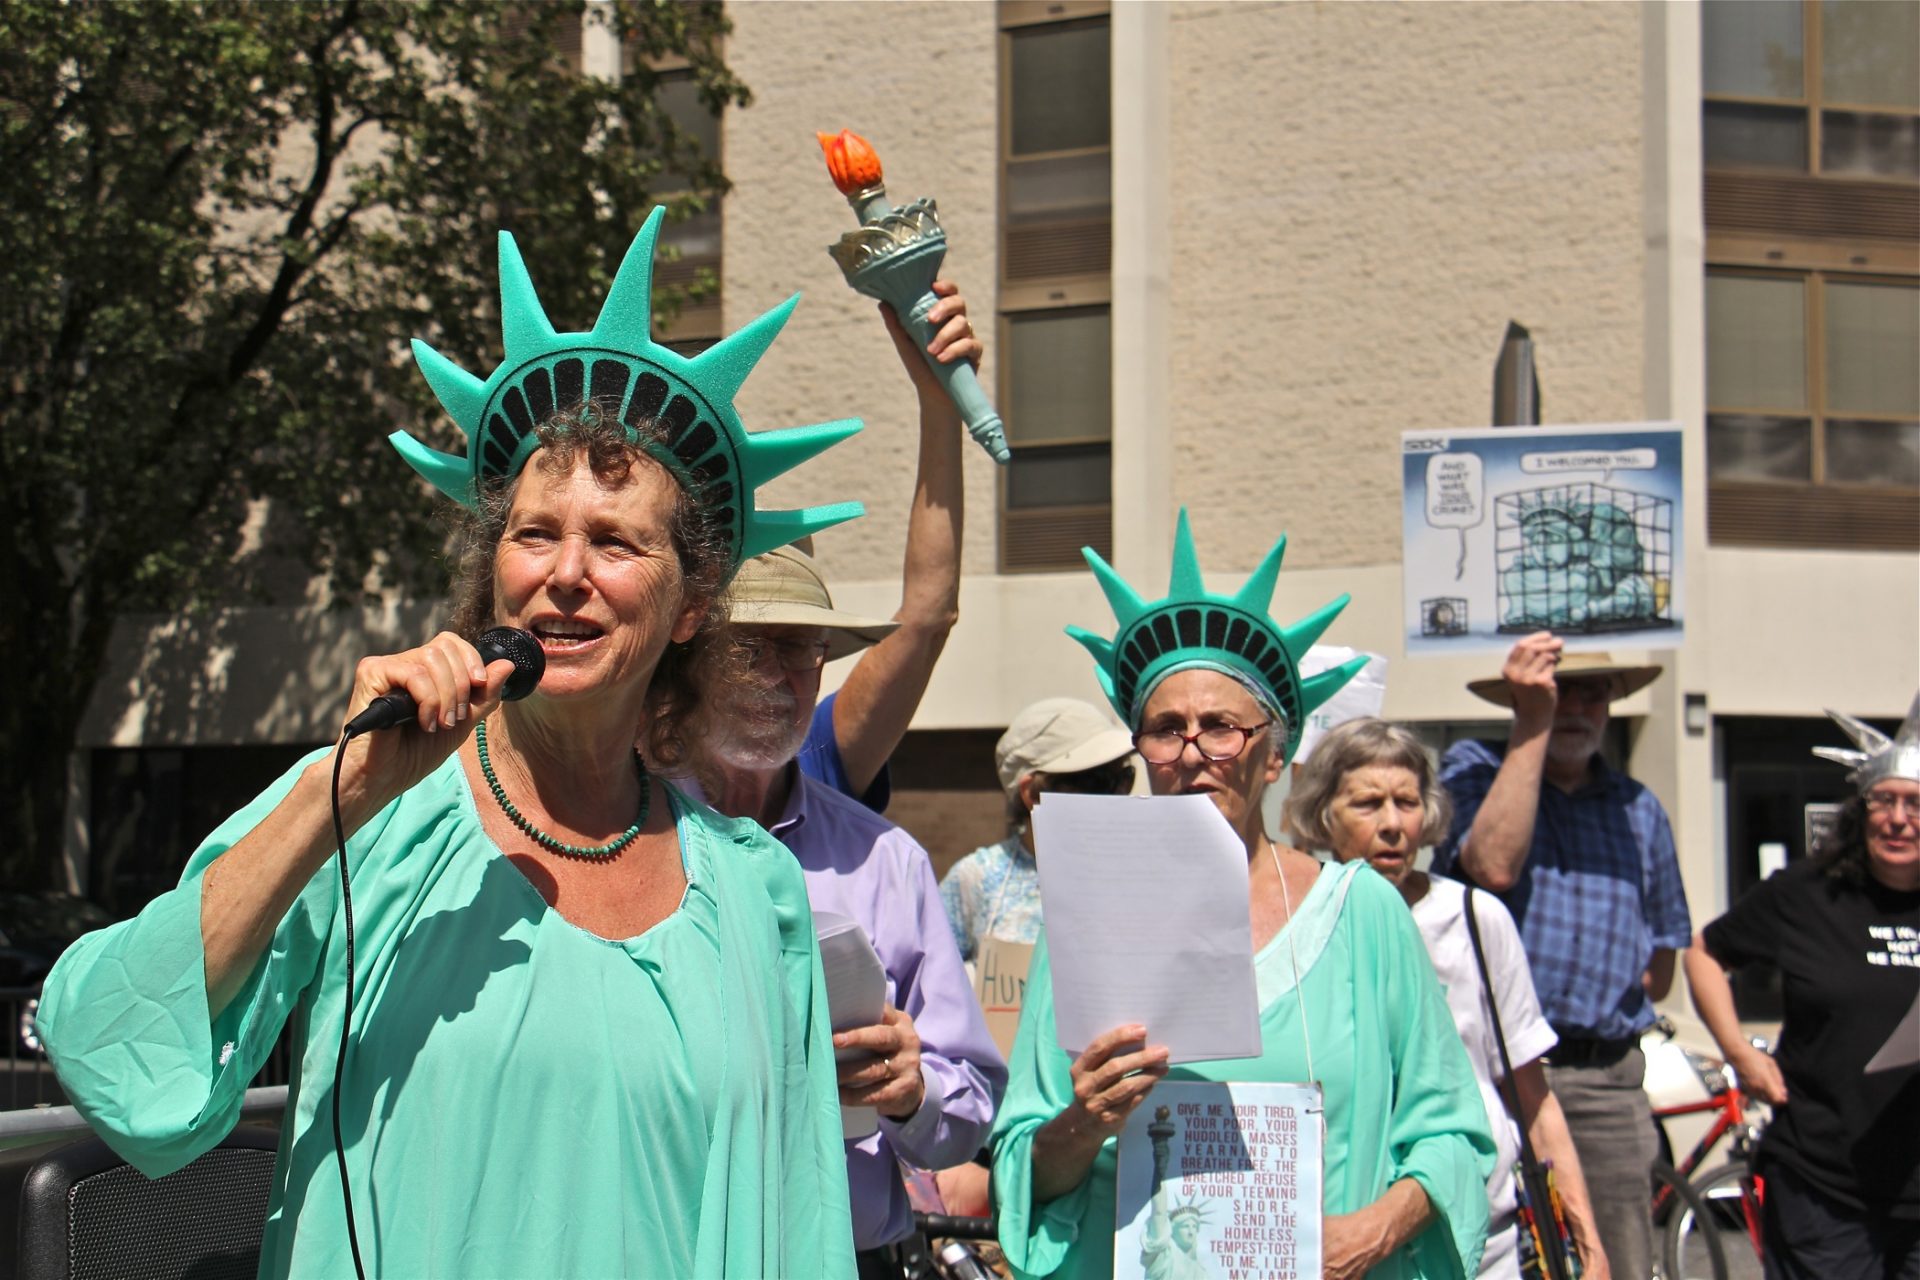 Lynne Iser of ElderWitness speaks outside the Philadelphia immigration enforcement field office during a protest against policies that separate families and put children in detention. 